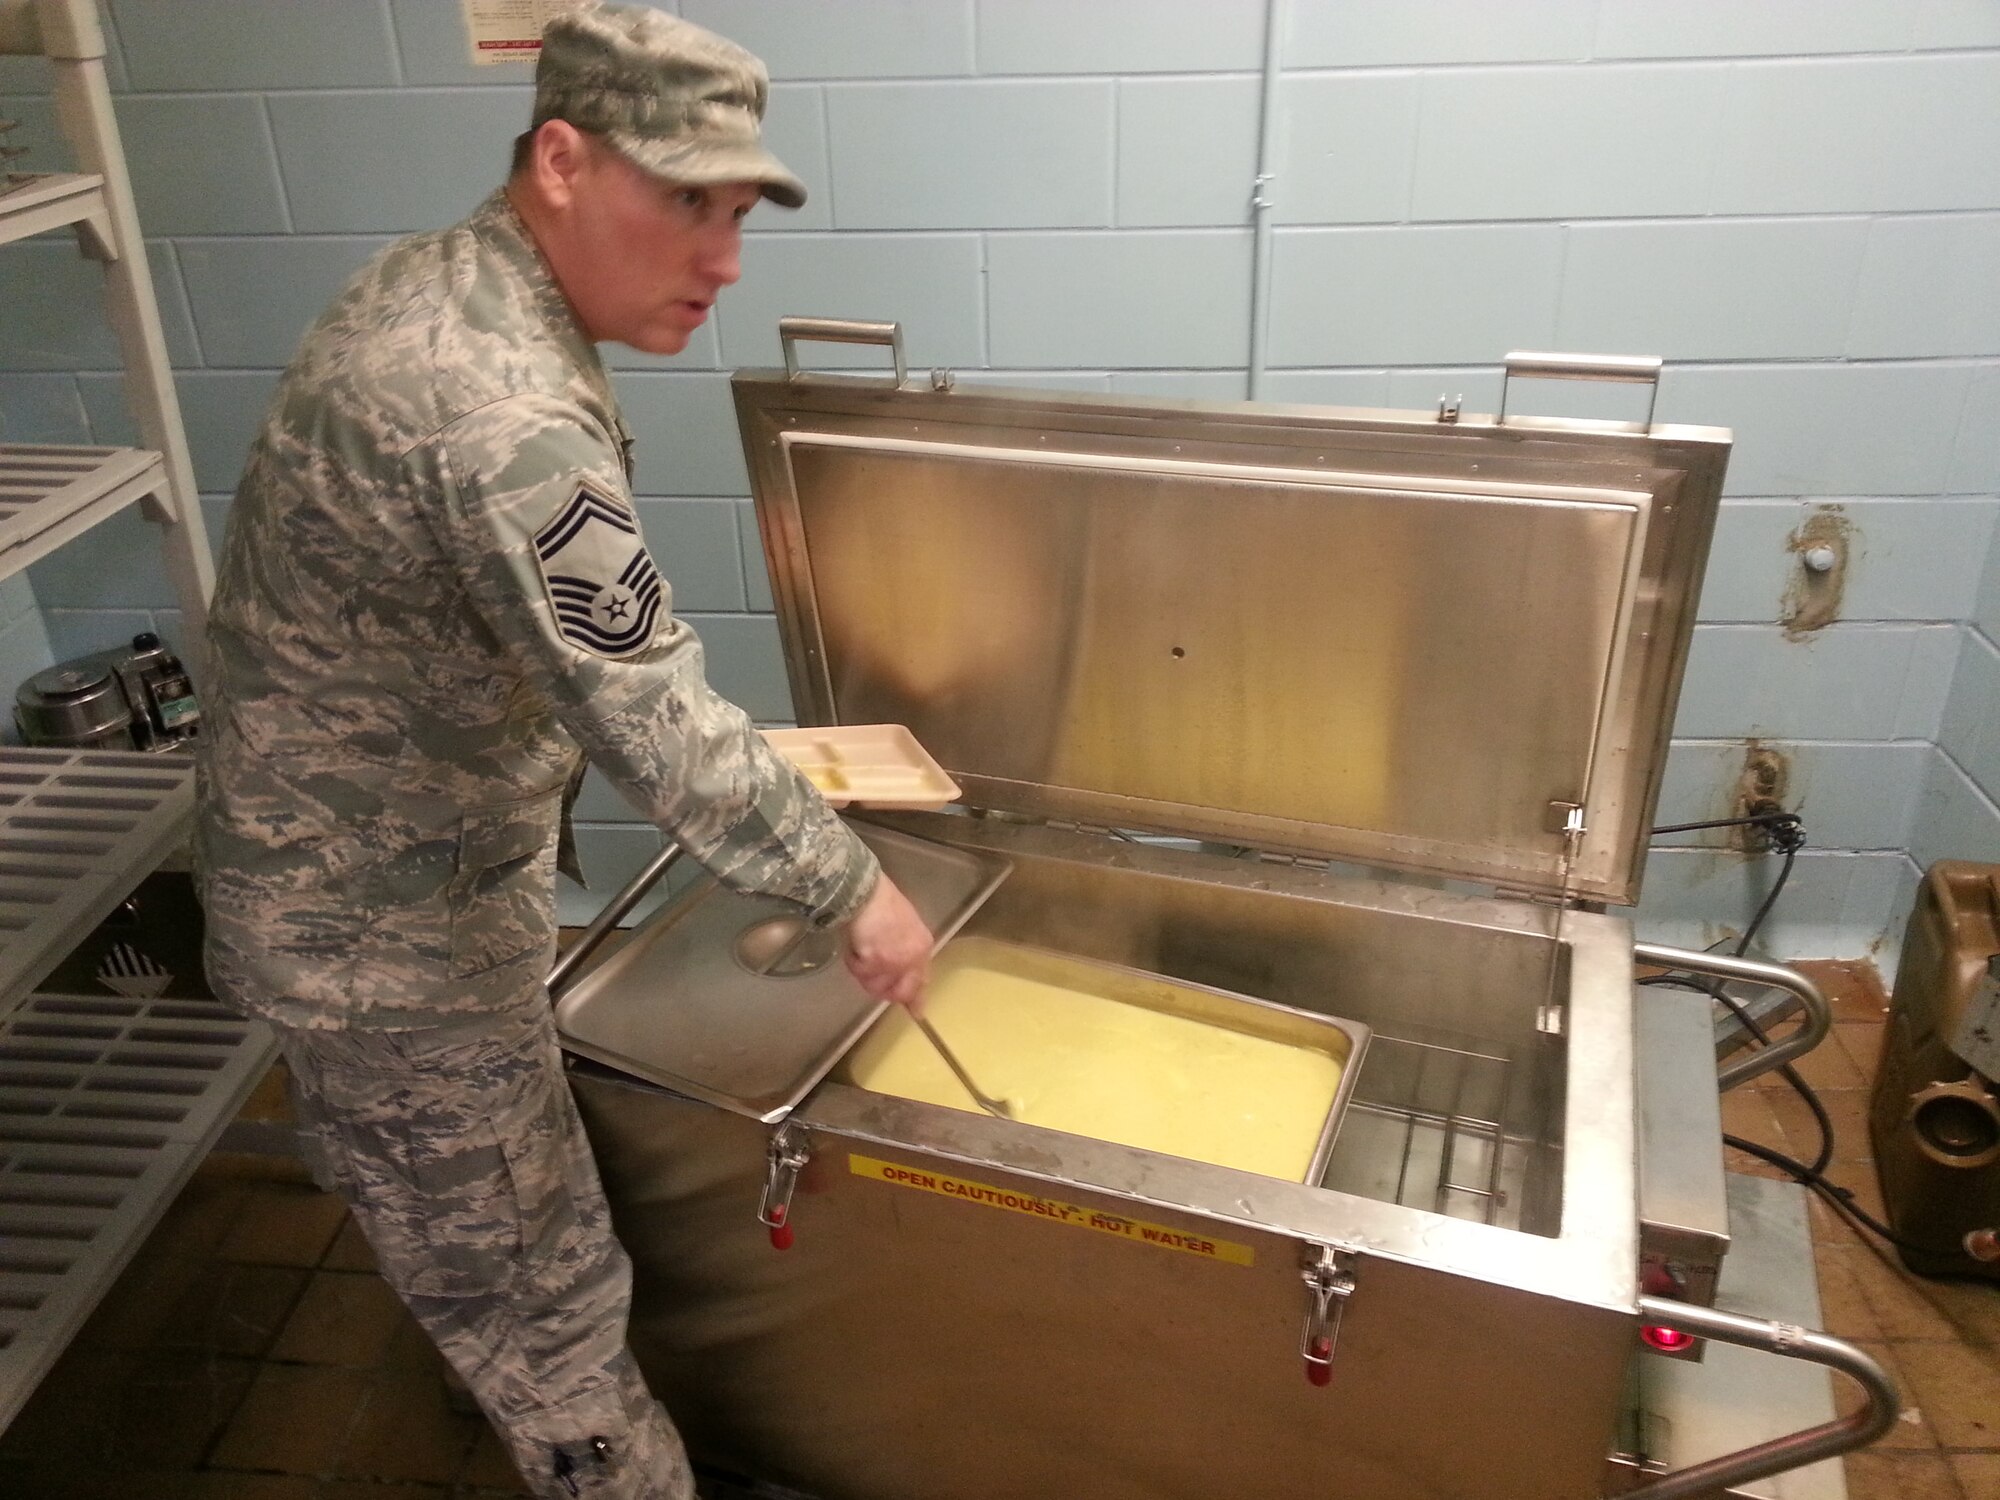 Senior Master Sgt. Scott Balko of the 152nd Sustainment Services Flight prepares eggs for Tennessee National Guard members while supporting the 2013 Presidential inauguration.  Balko was one of nine High Rollers who traveled to the District of Columbia for the ceremony.  USAF Photo by David Hill (released).